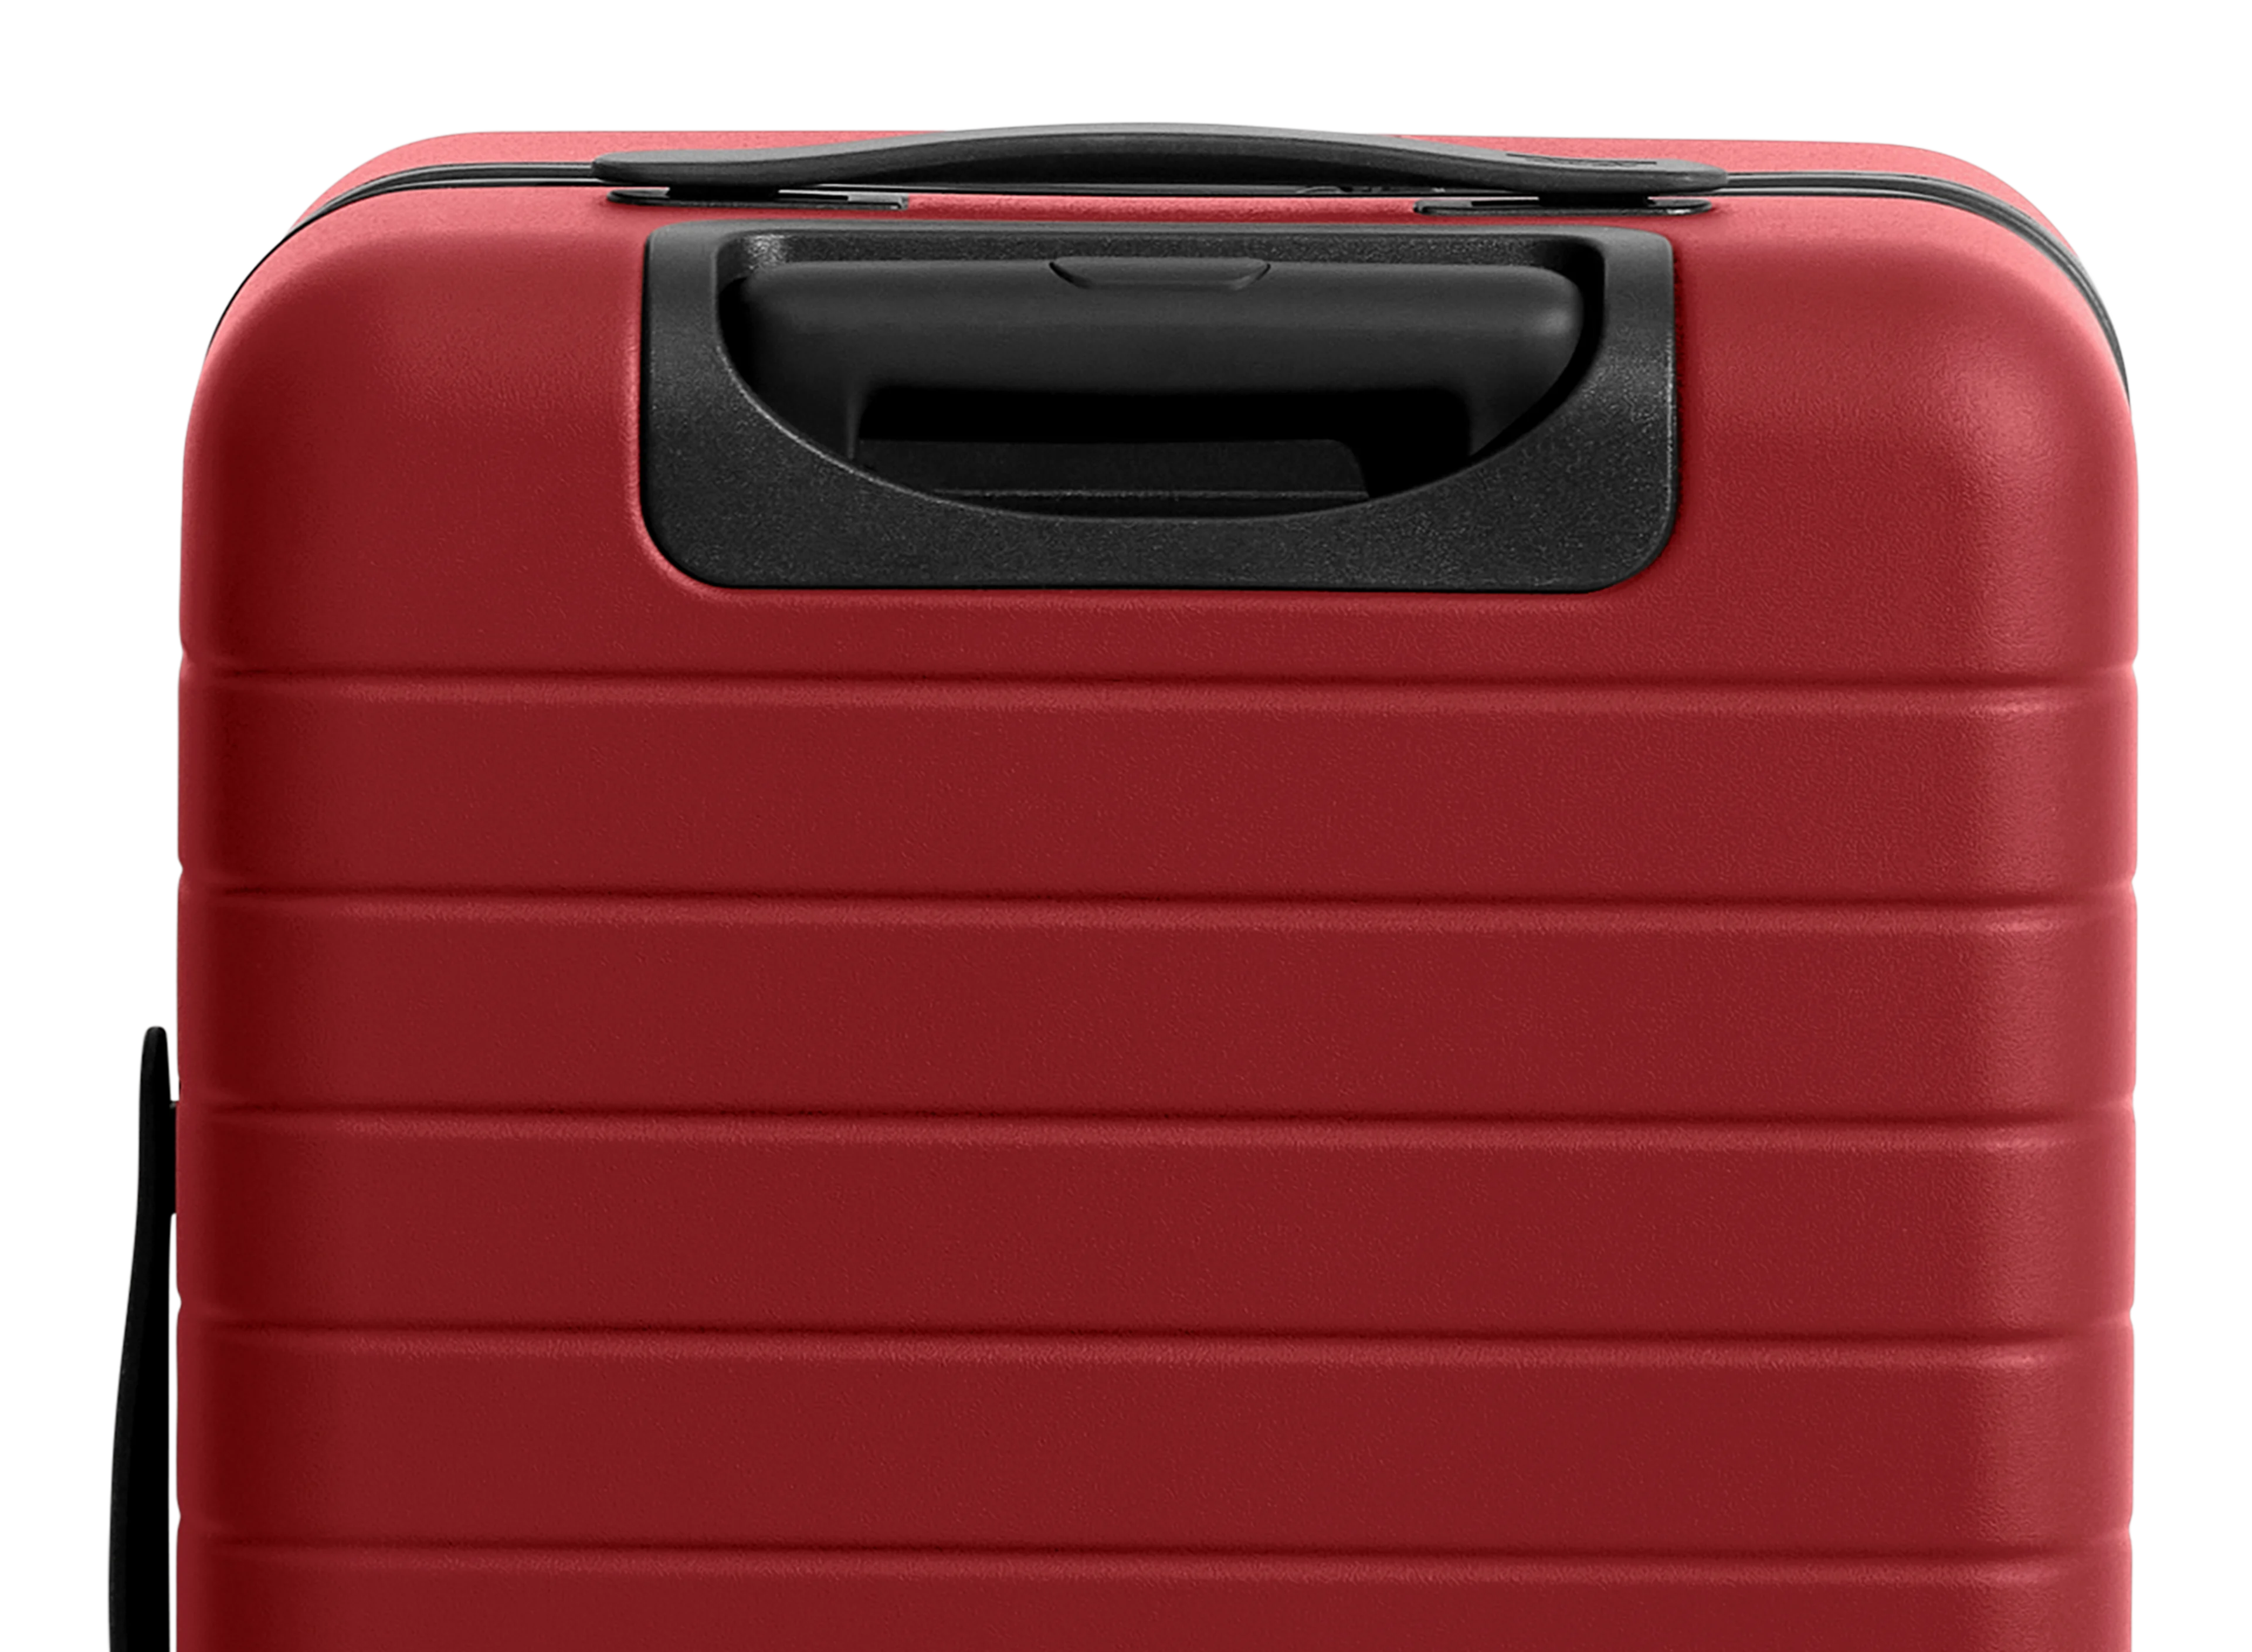 The Bigger Carry-On Flex in Tango Red